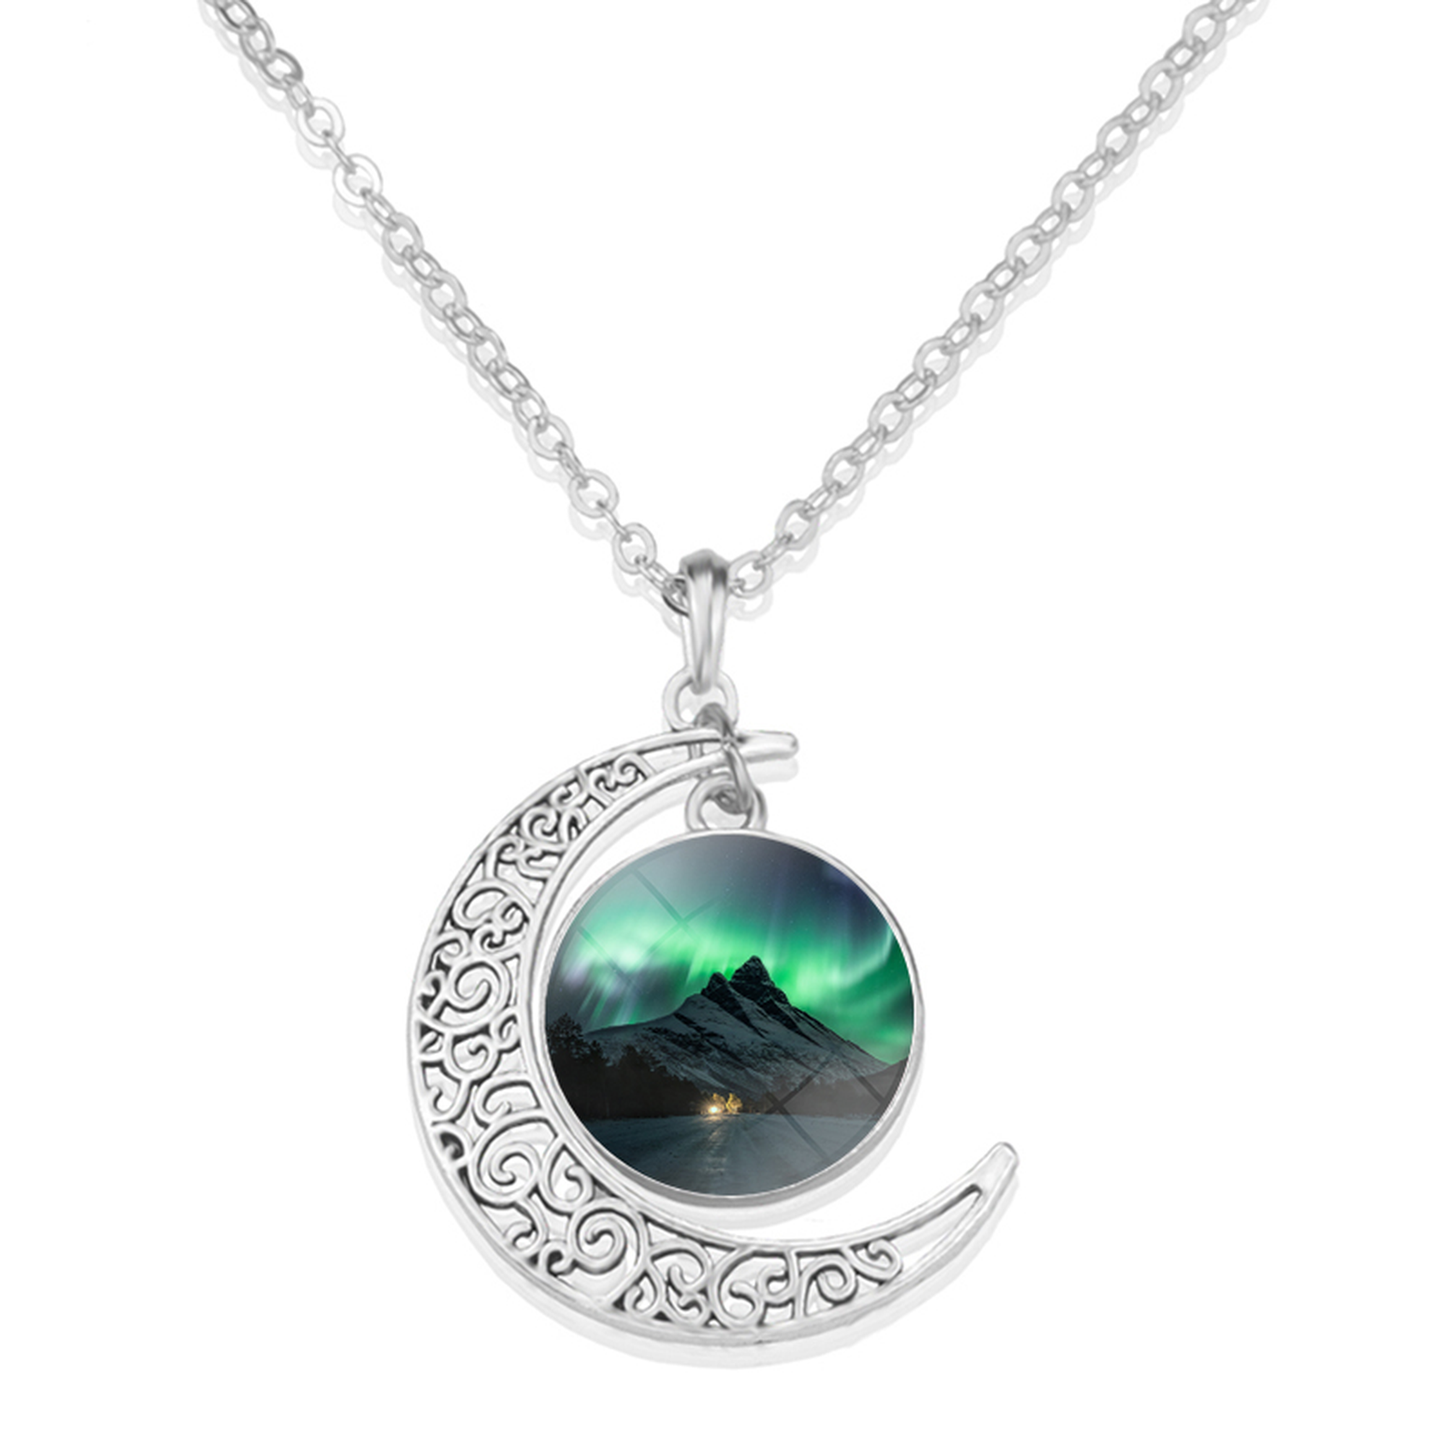 Unique Aurora Borealis Crescent Necklace - Northern Light Jewelry - Crescent Glass Cabochon Pendent Necklace - Perfect Aurora Lovers Gift 6